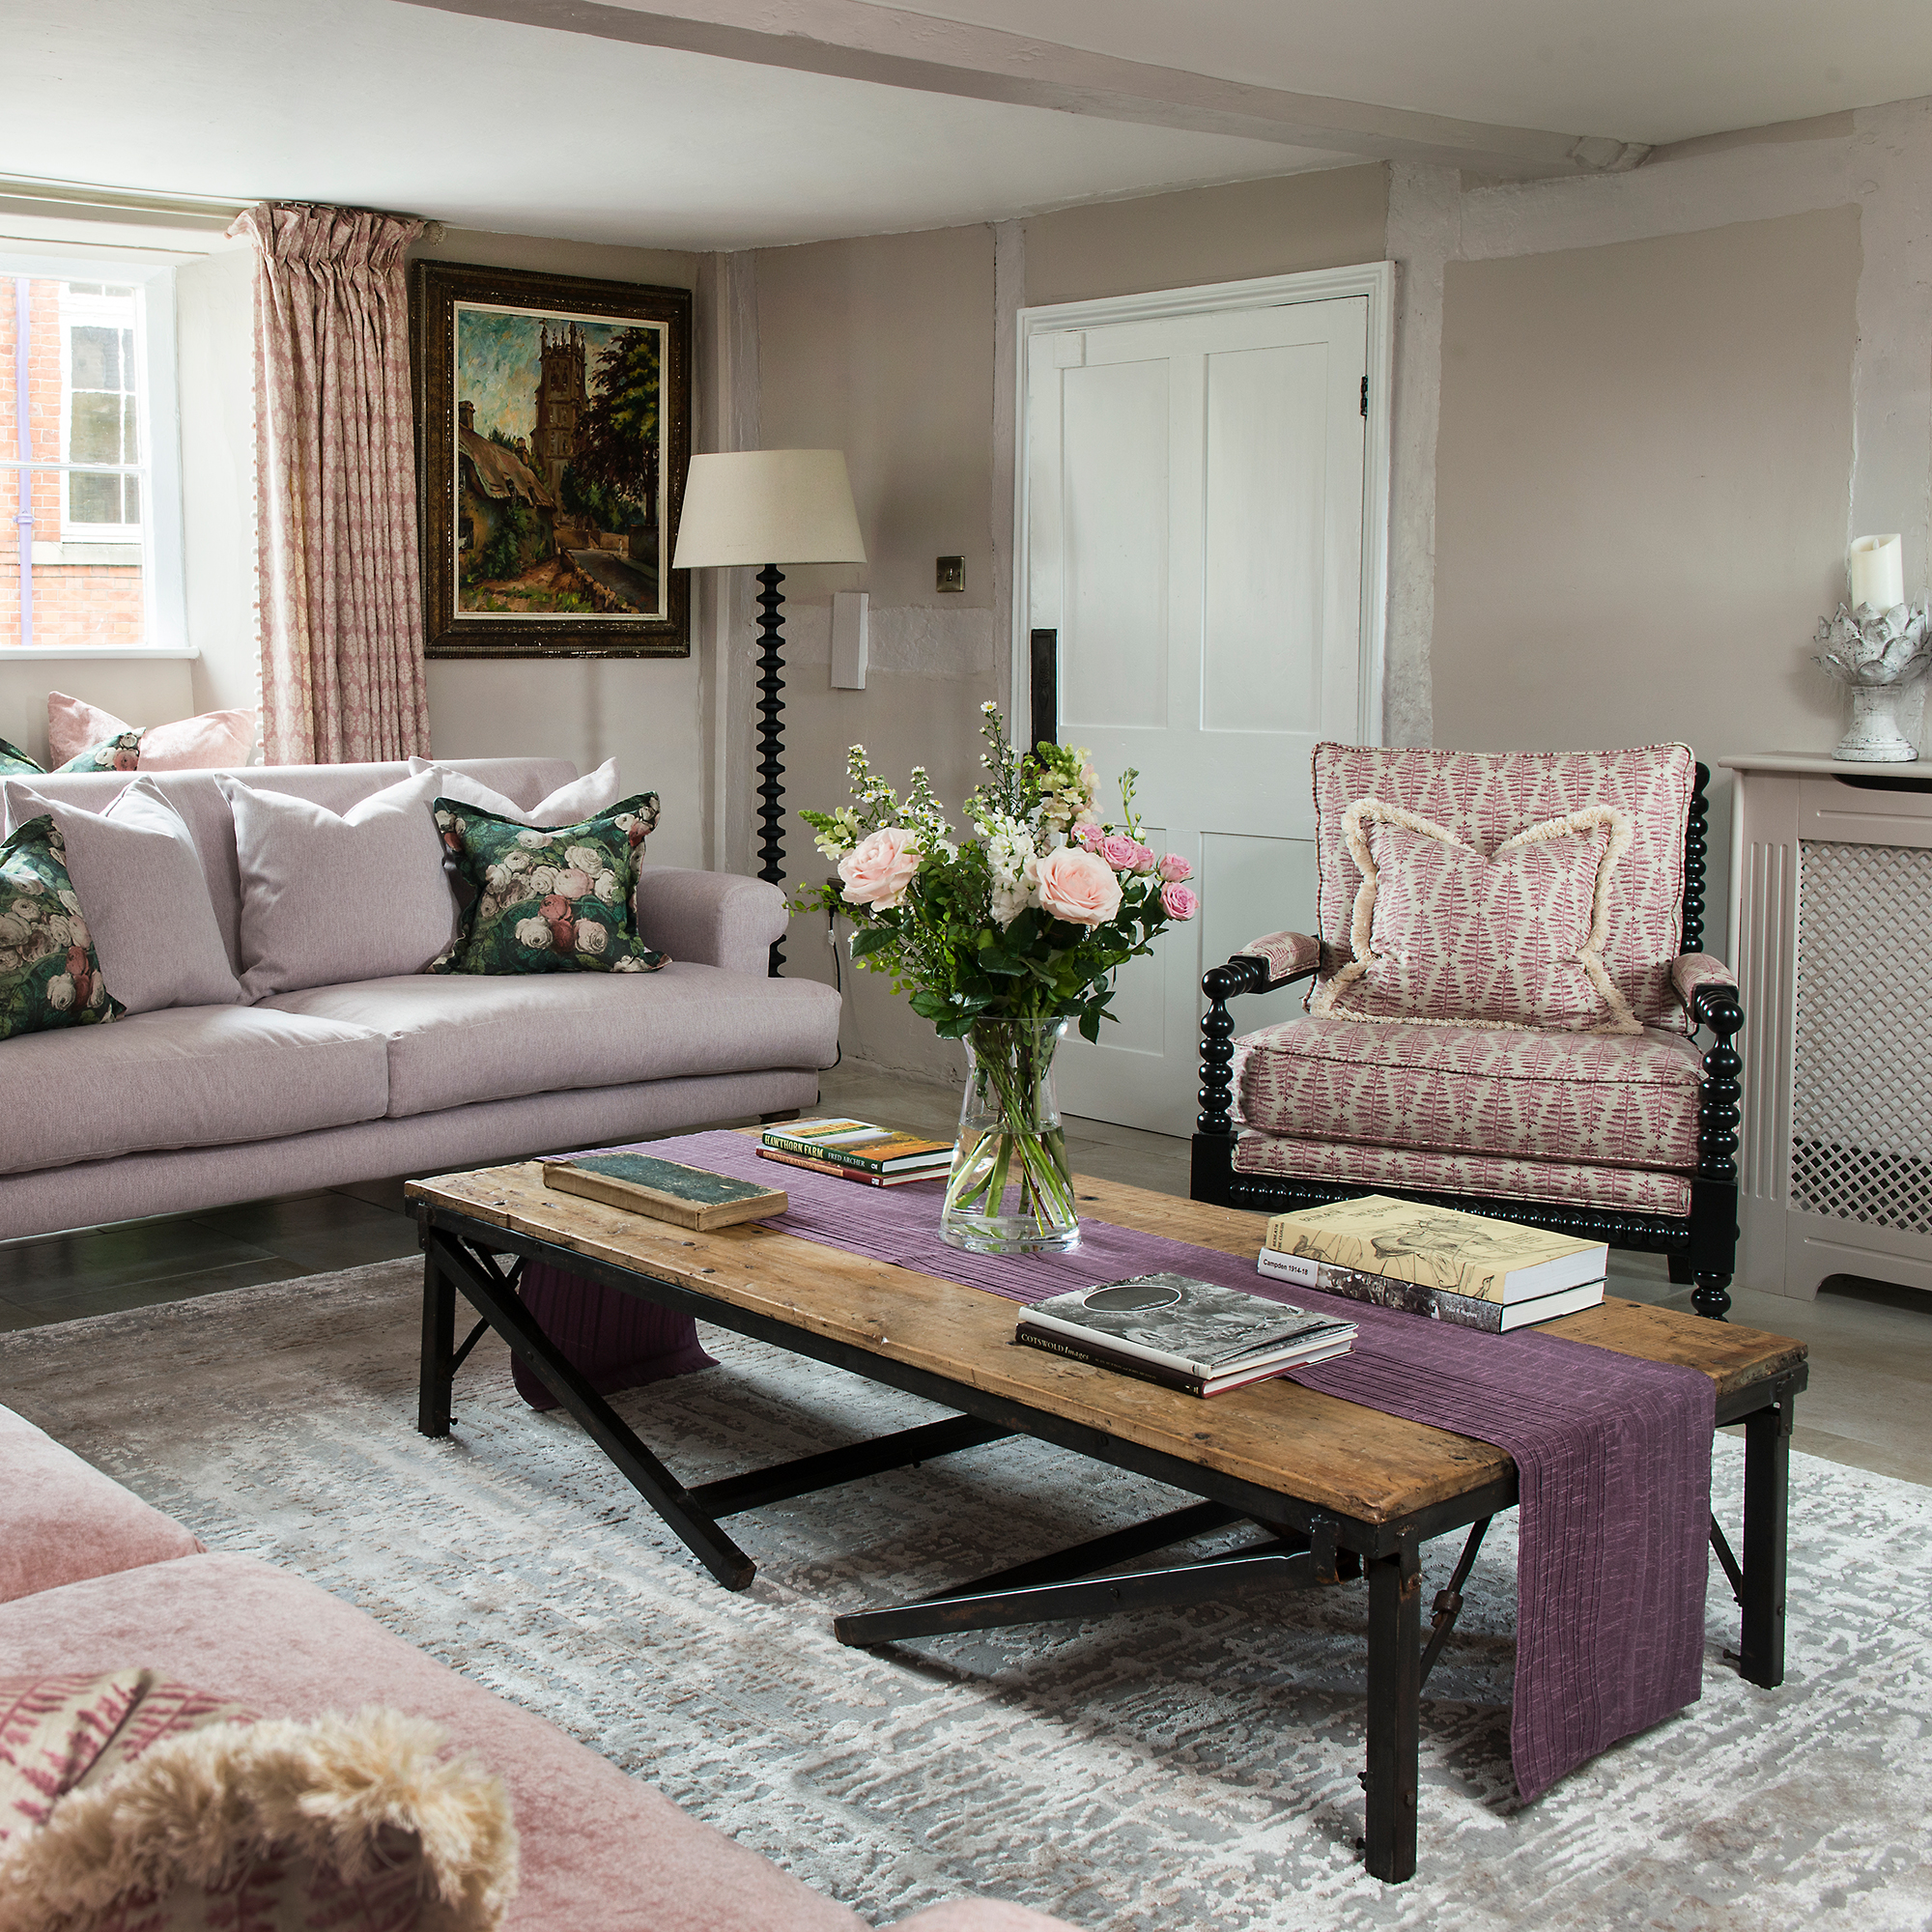 pink and taupe modern country style living room in a cottage